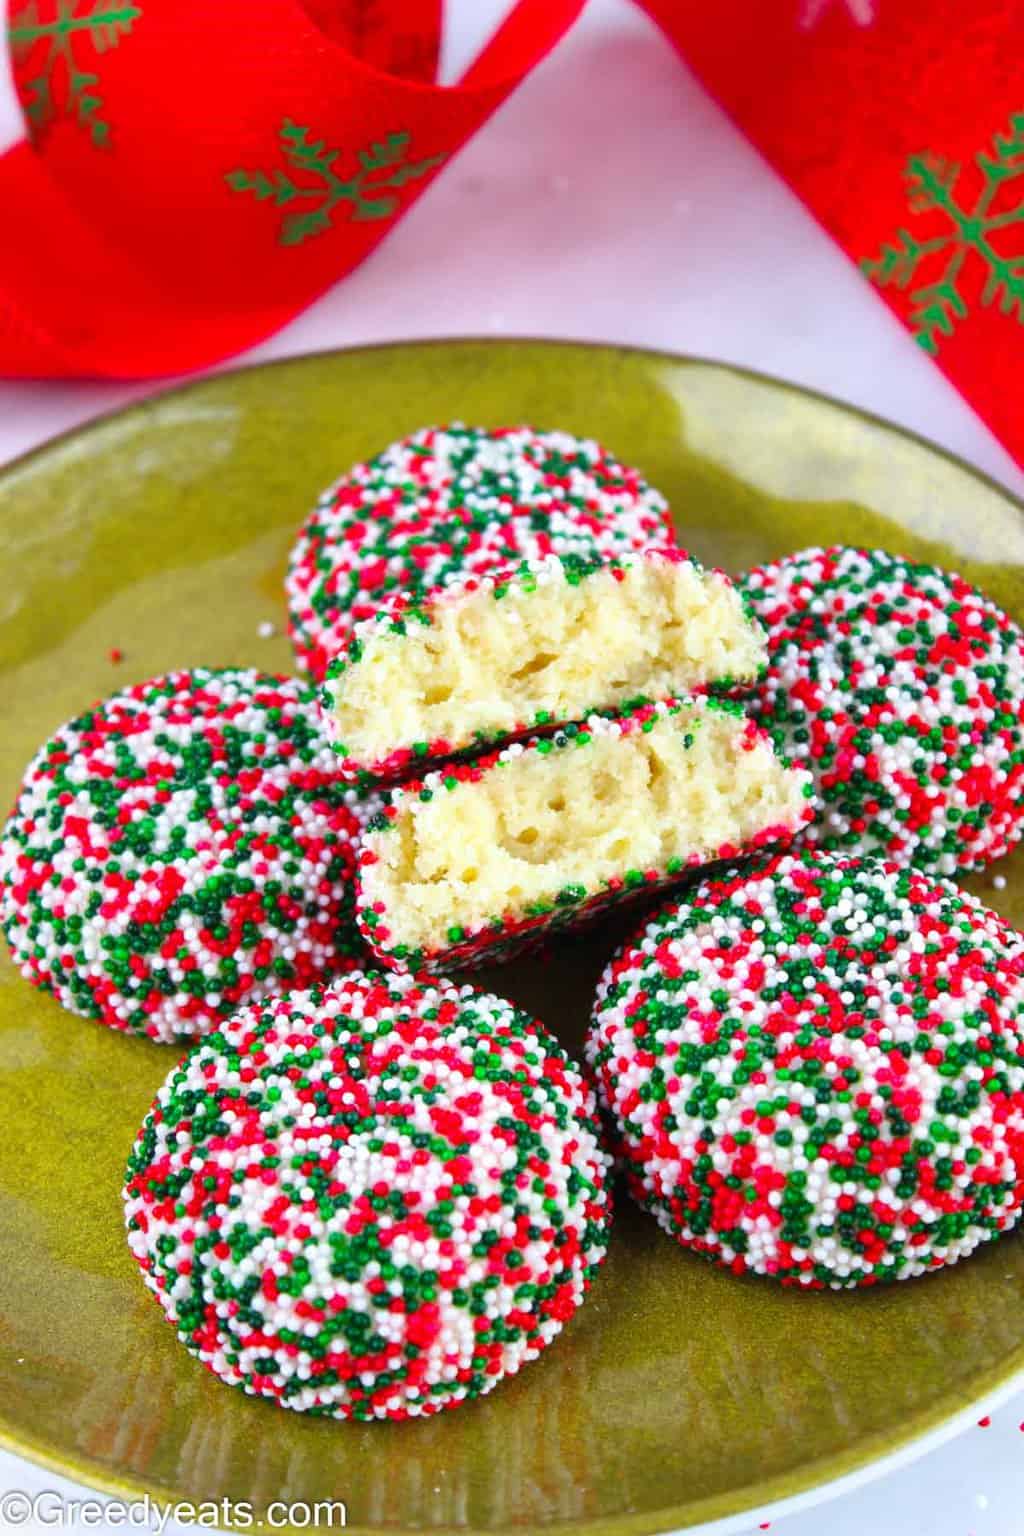 Puffy, chewy and soft sugar cookies made with cream cheese and Christmas sprinkles for your Holiday Cookie Tray!